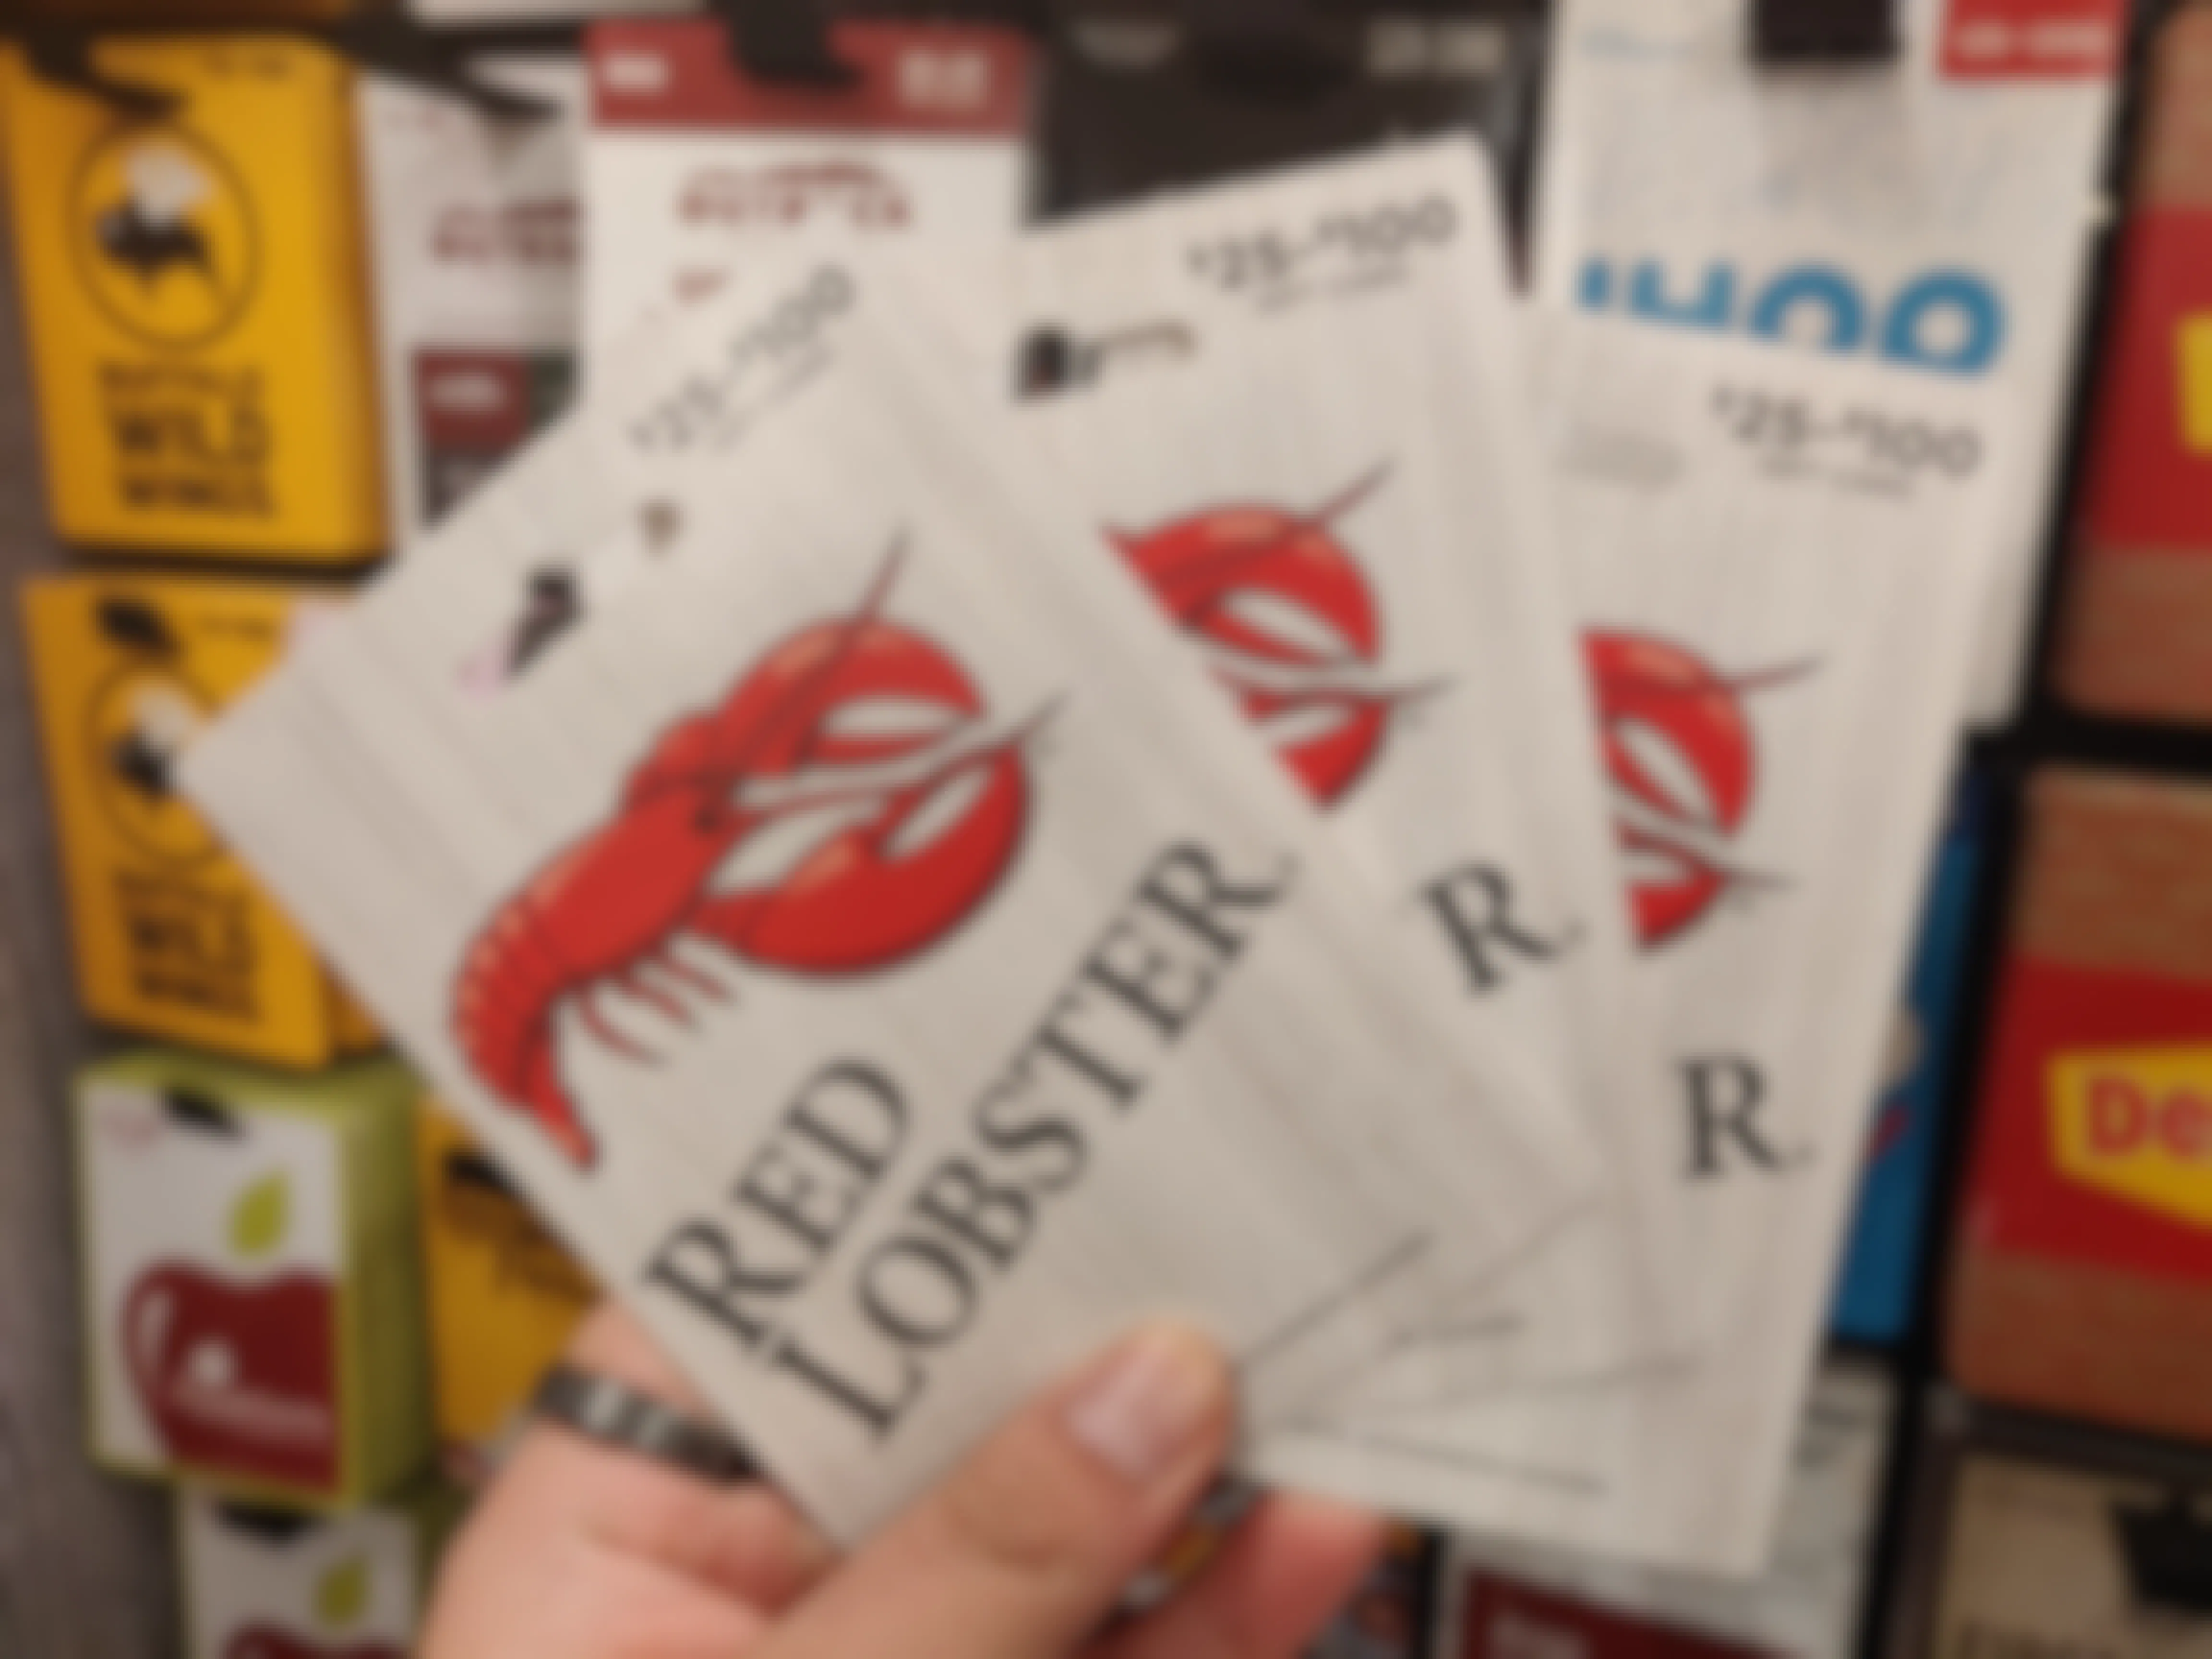 red lobster gift cards against a background of other gift cards